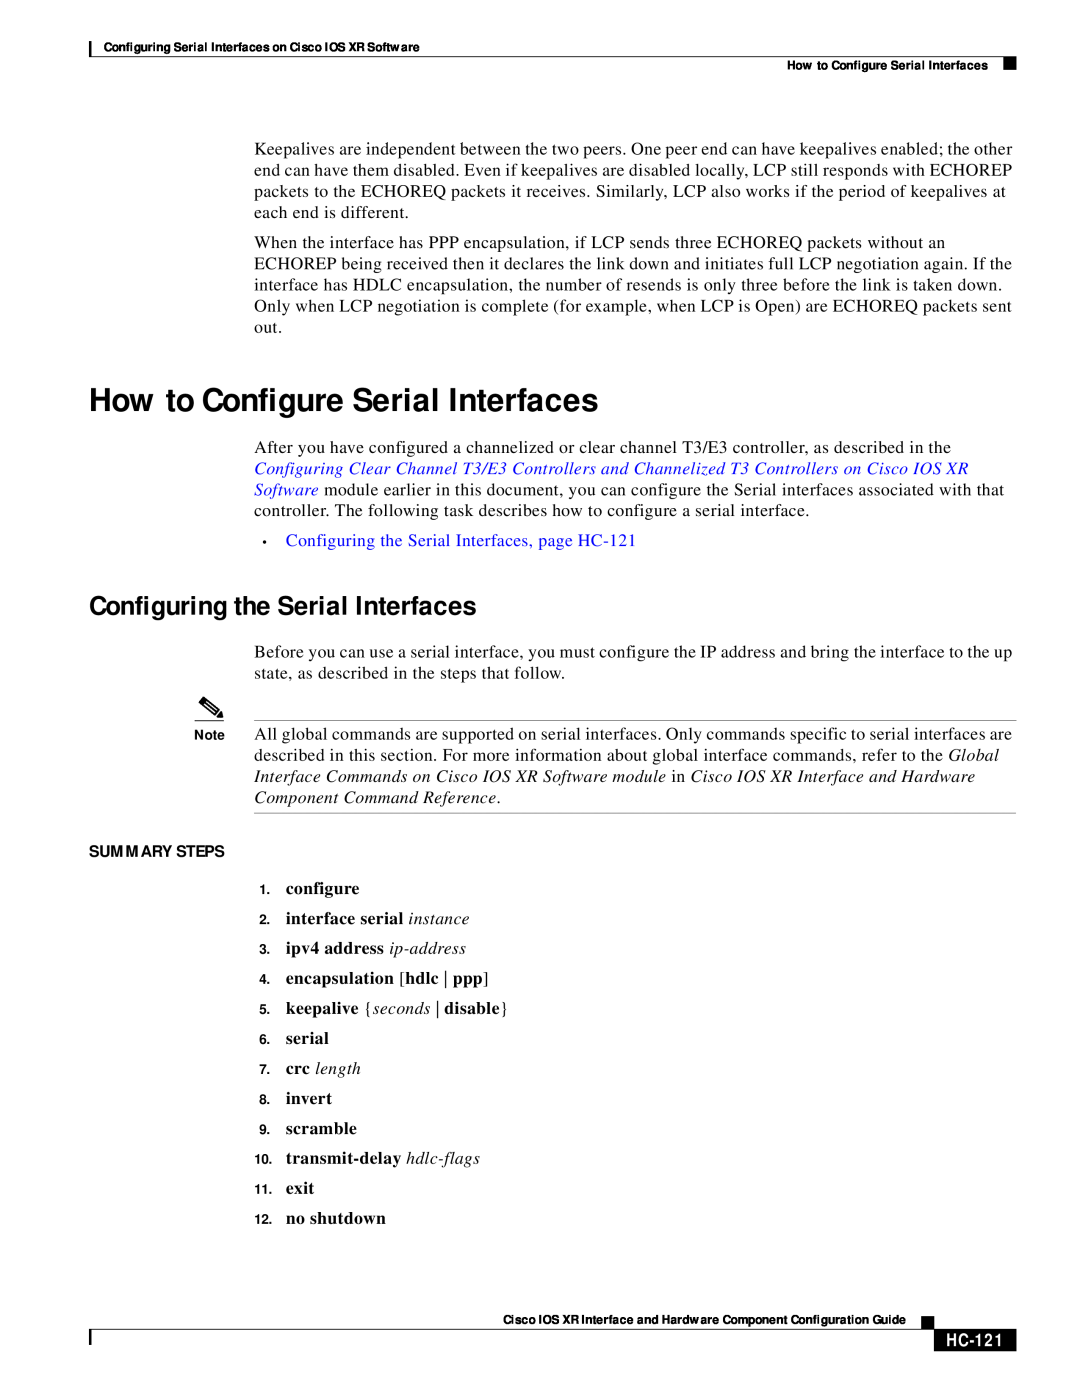 Cisco Systems XR 12000 SIP-601 manual How to Configure Serial Interfaces, Configuring the Serial Interfaces, Summary Steps 